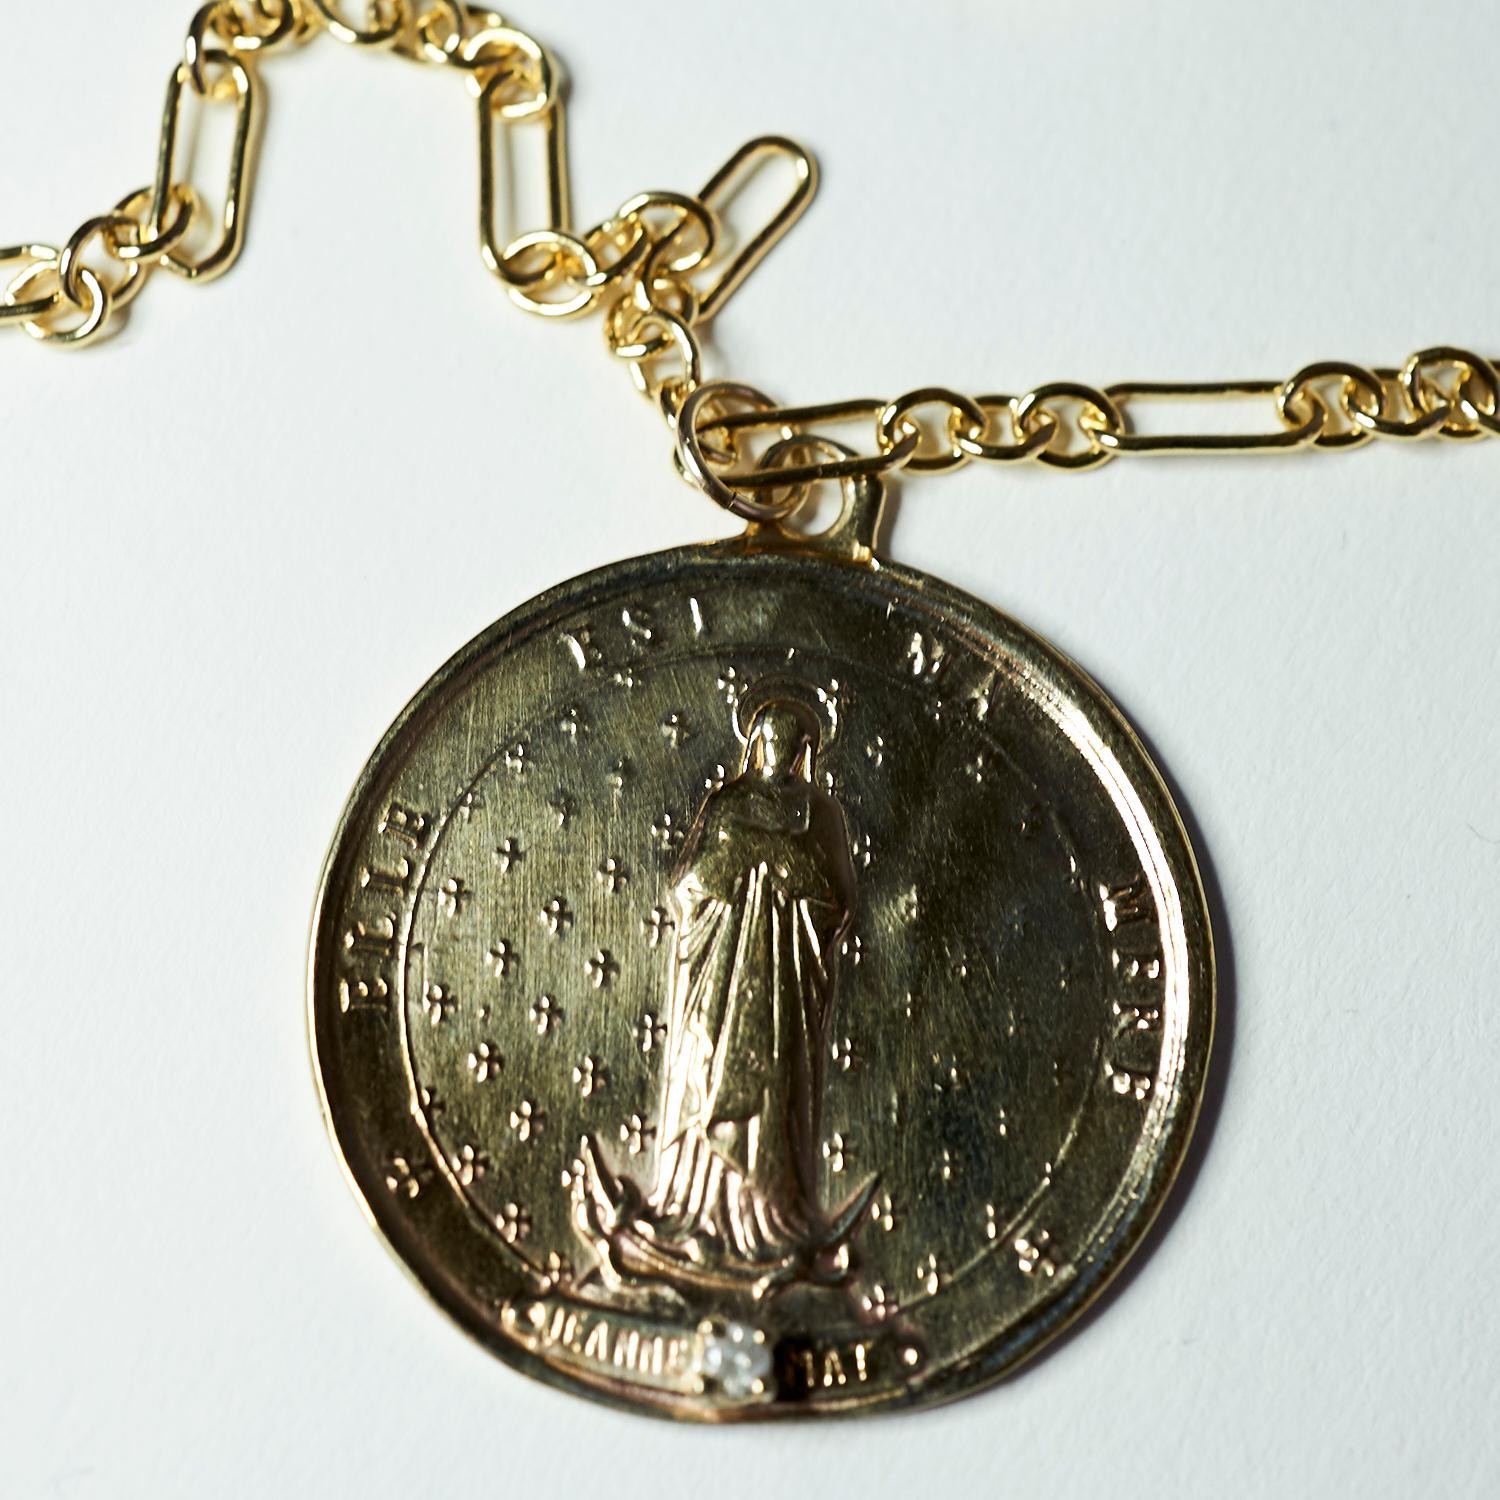 Raw Diamond French Saint Medal Coin Bronze Jeanne Le Mat Necklace Gold Filled Chain J Dauphin

Exclusive piece with a Round Medal Coin with French Saint Jeanne Le Mat in Bronze and a Raw Diamond set in a Gold prong hanging on a gold filled Chain.